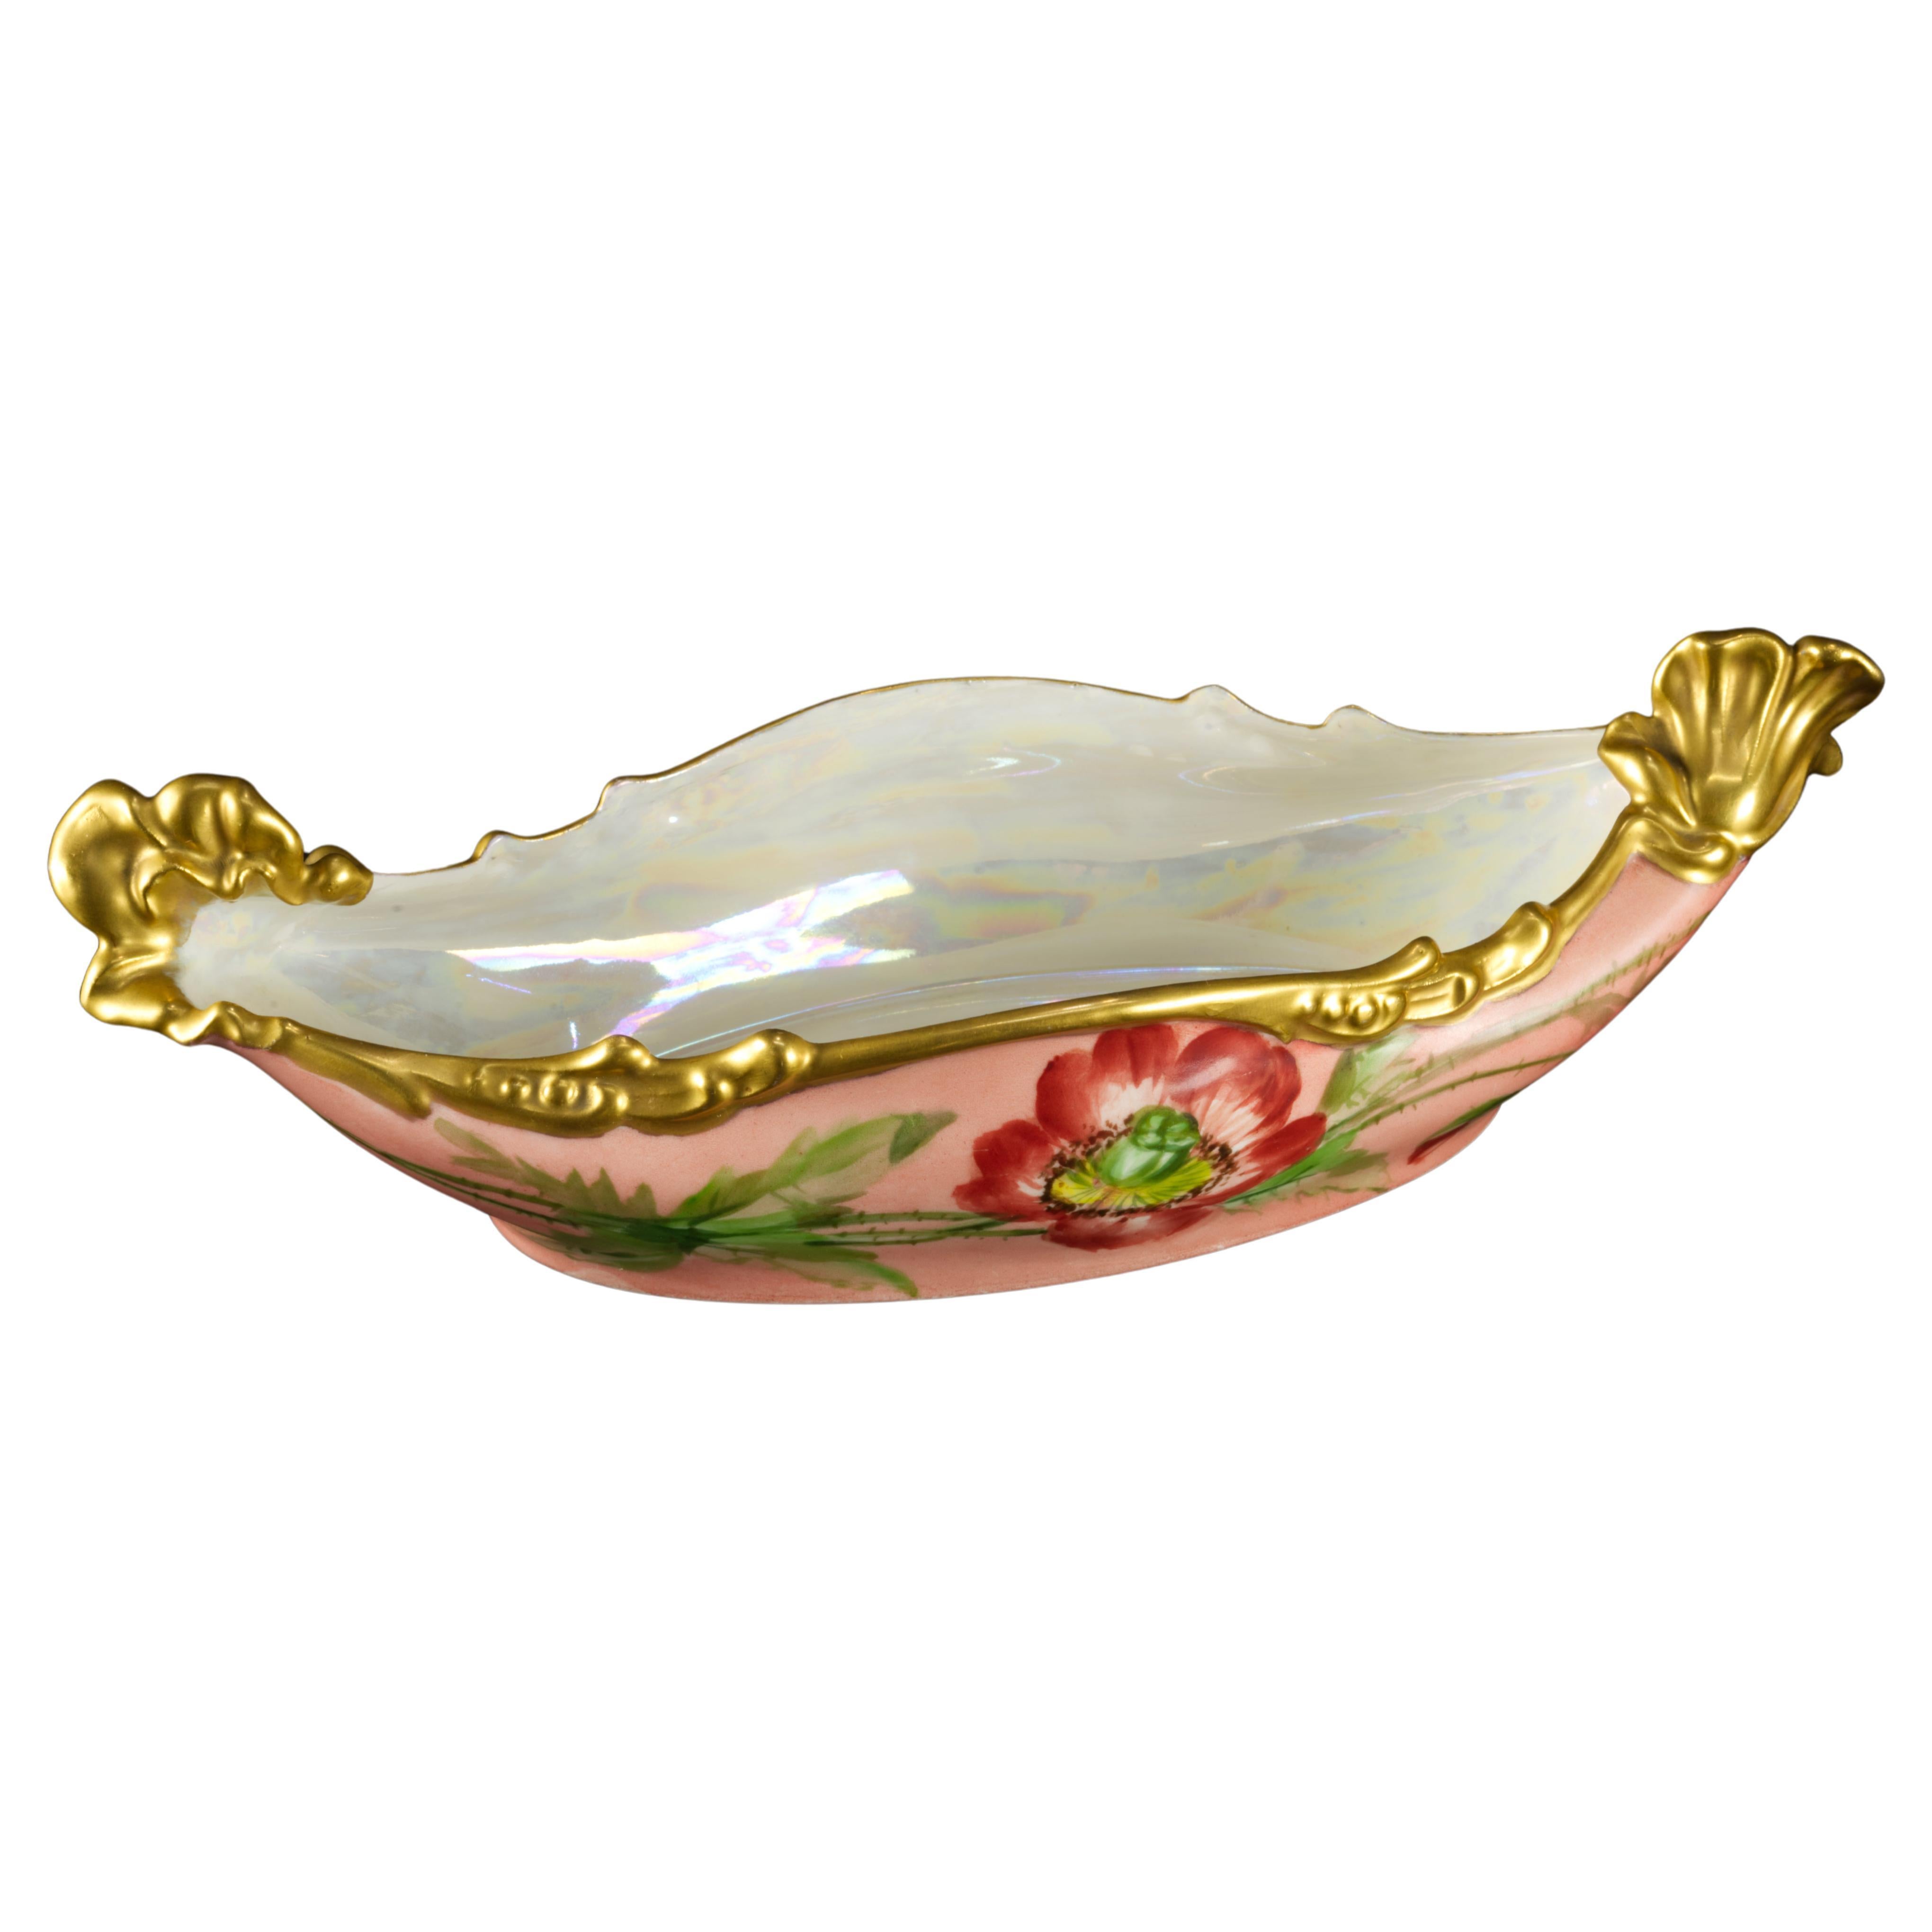 Rare Jean Pouyat Limoges France Oval Hand-painted Porcelain Ravier Bowl, 1926